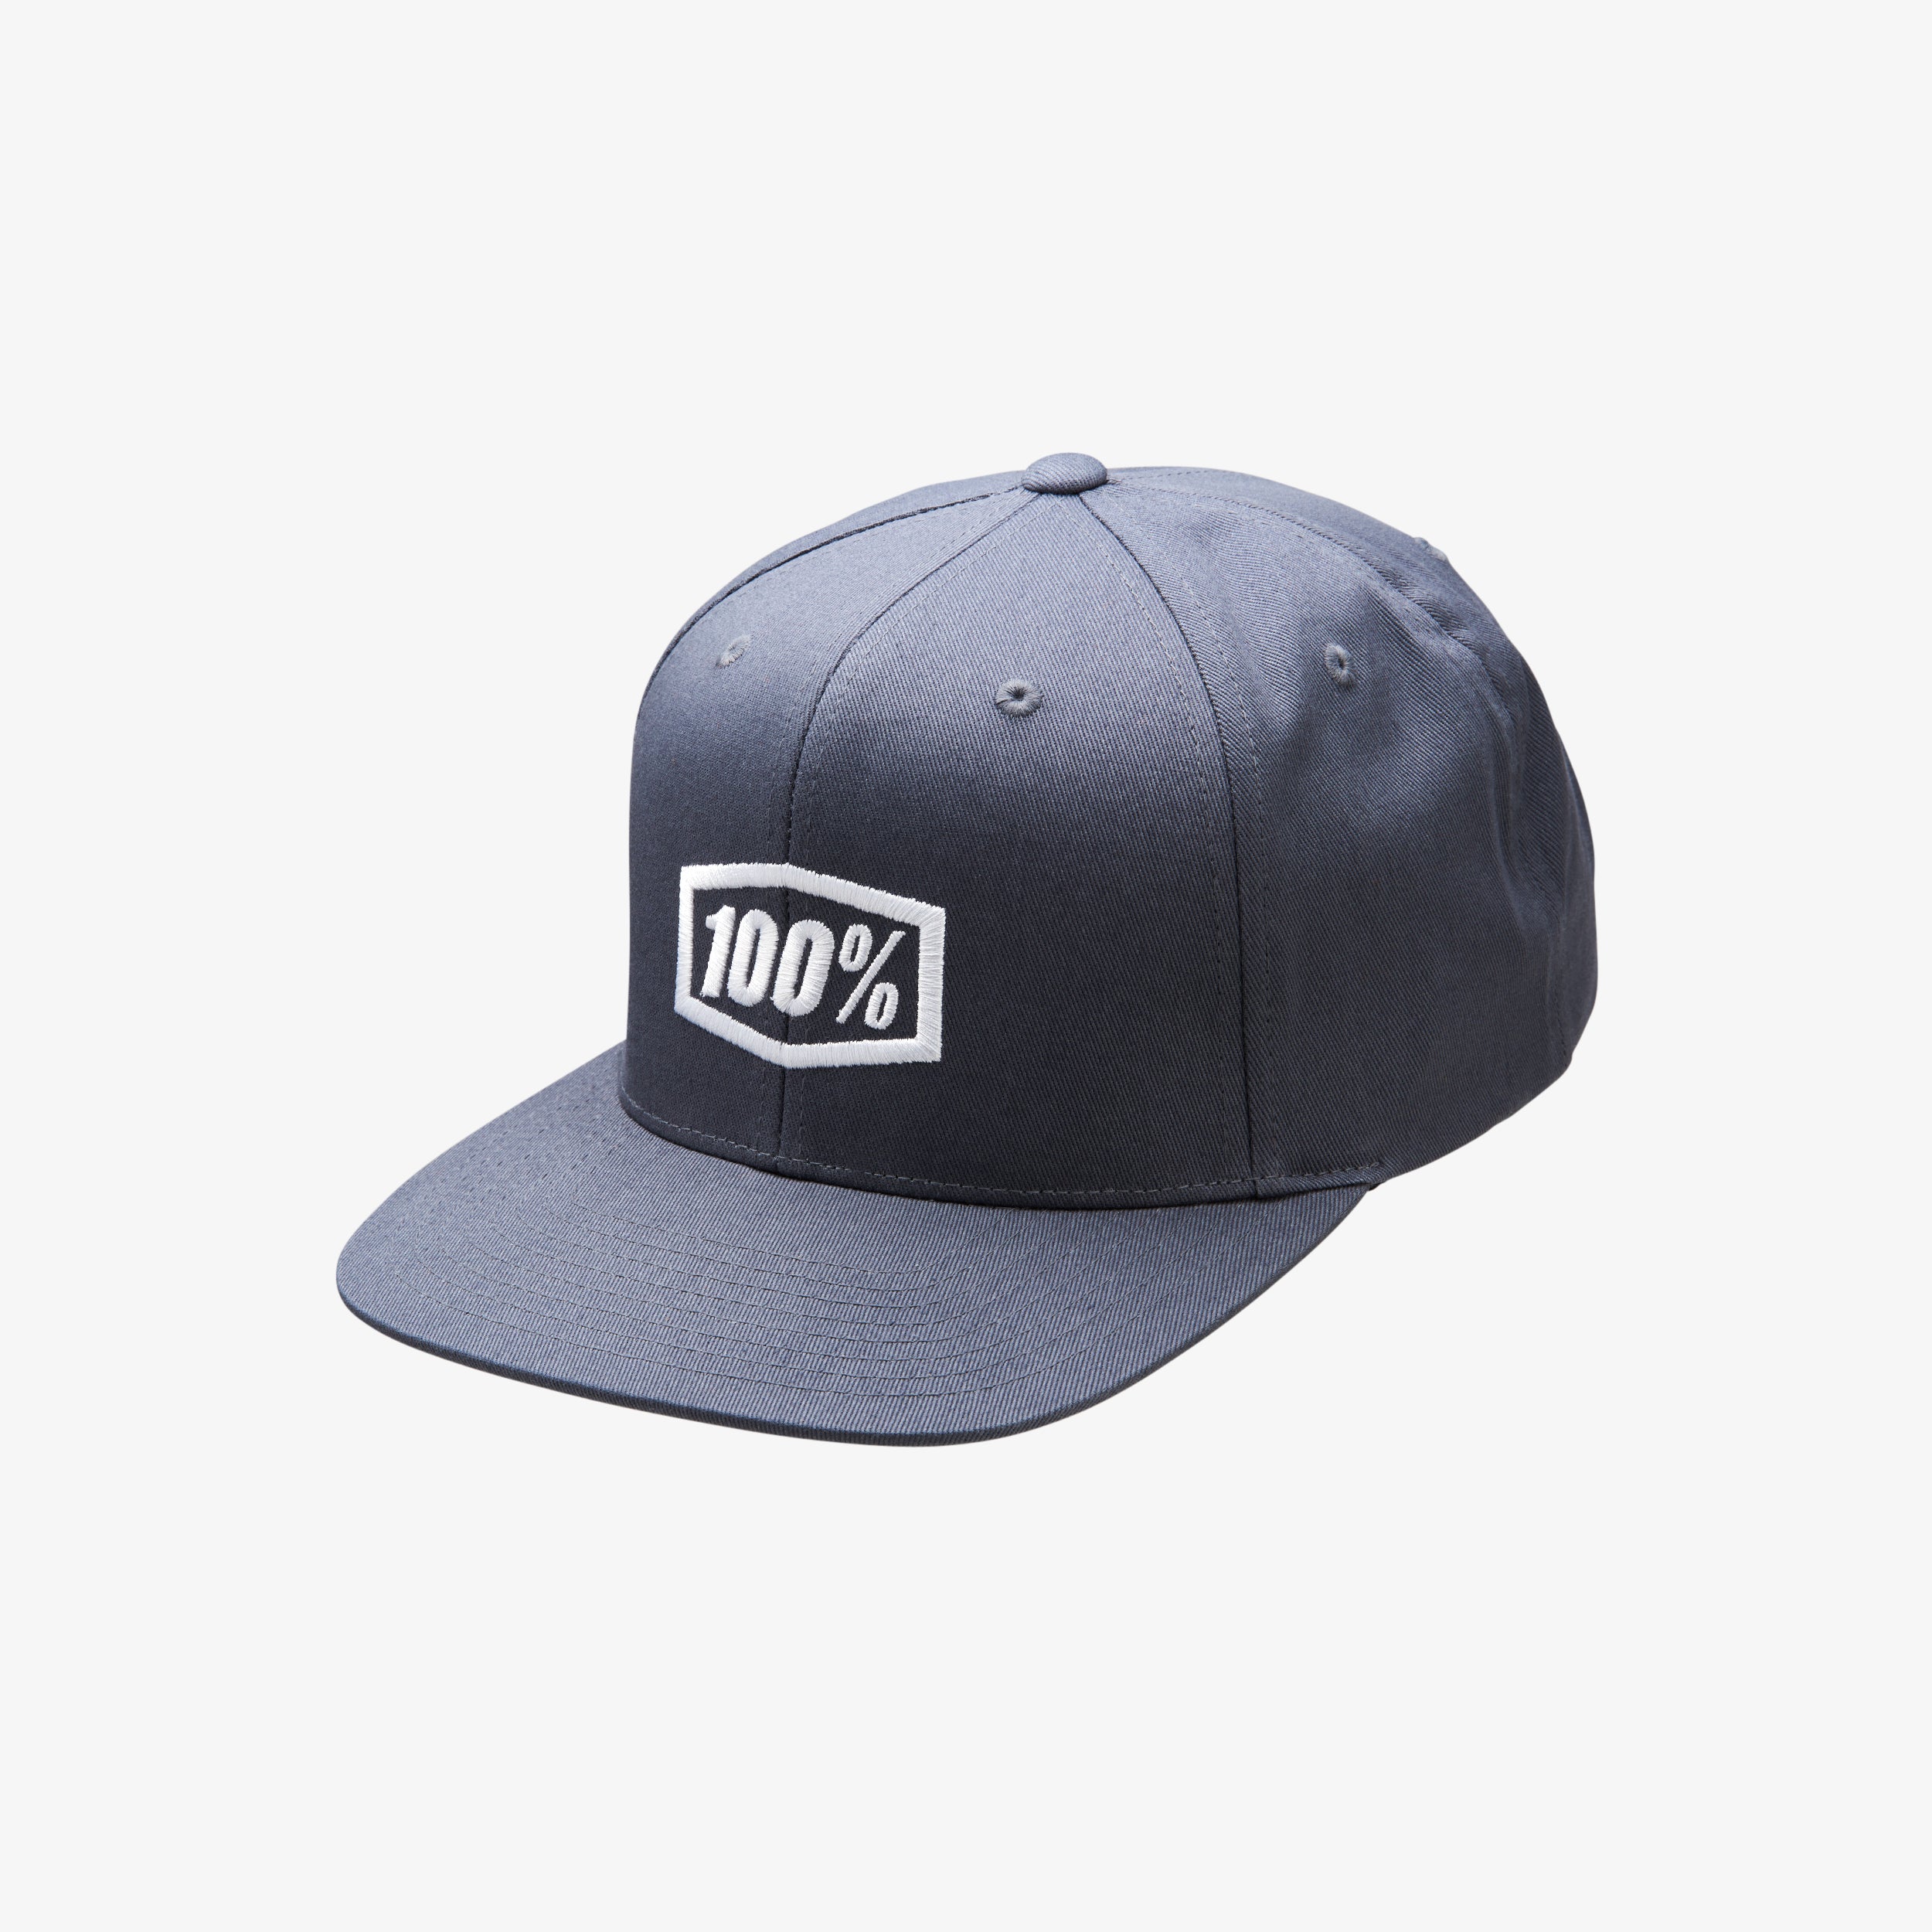 ICON Youth Snapback Cap Heather Charcoal